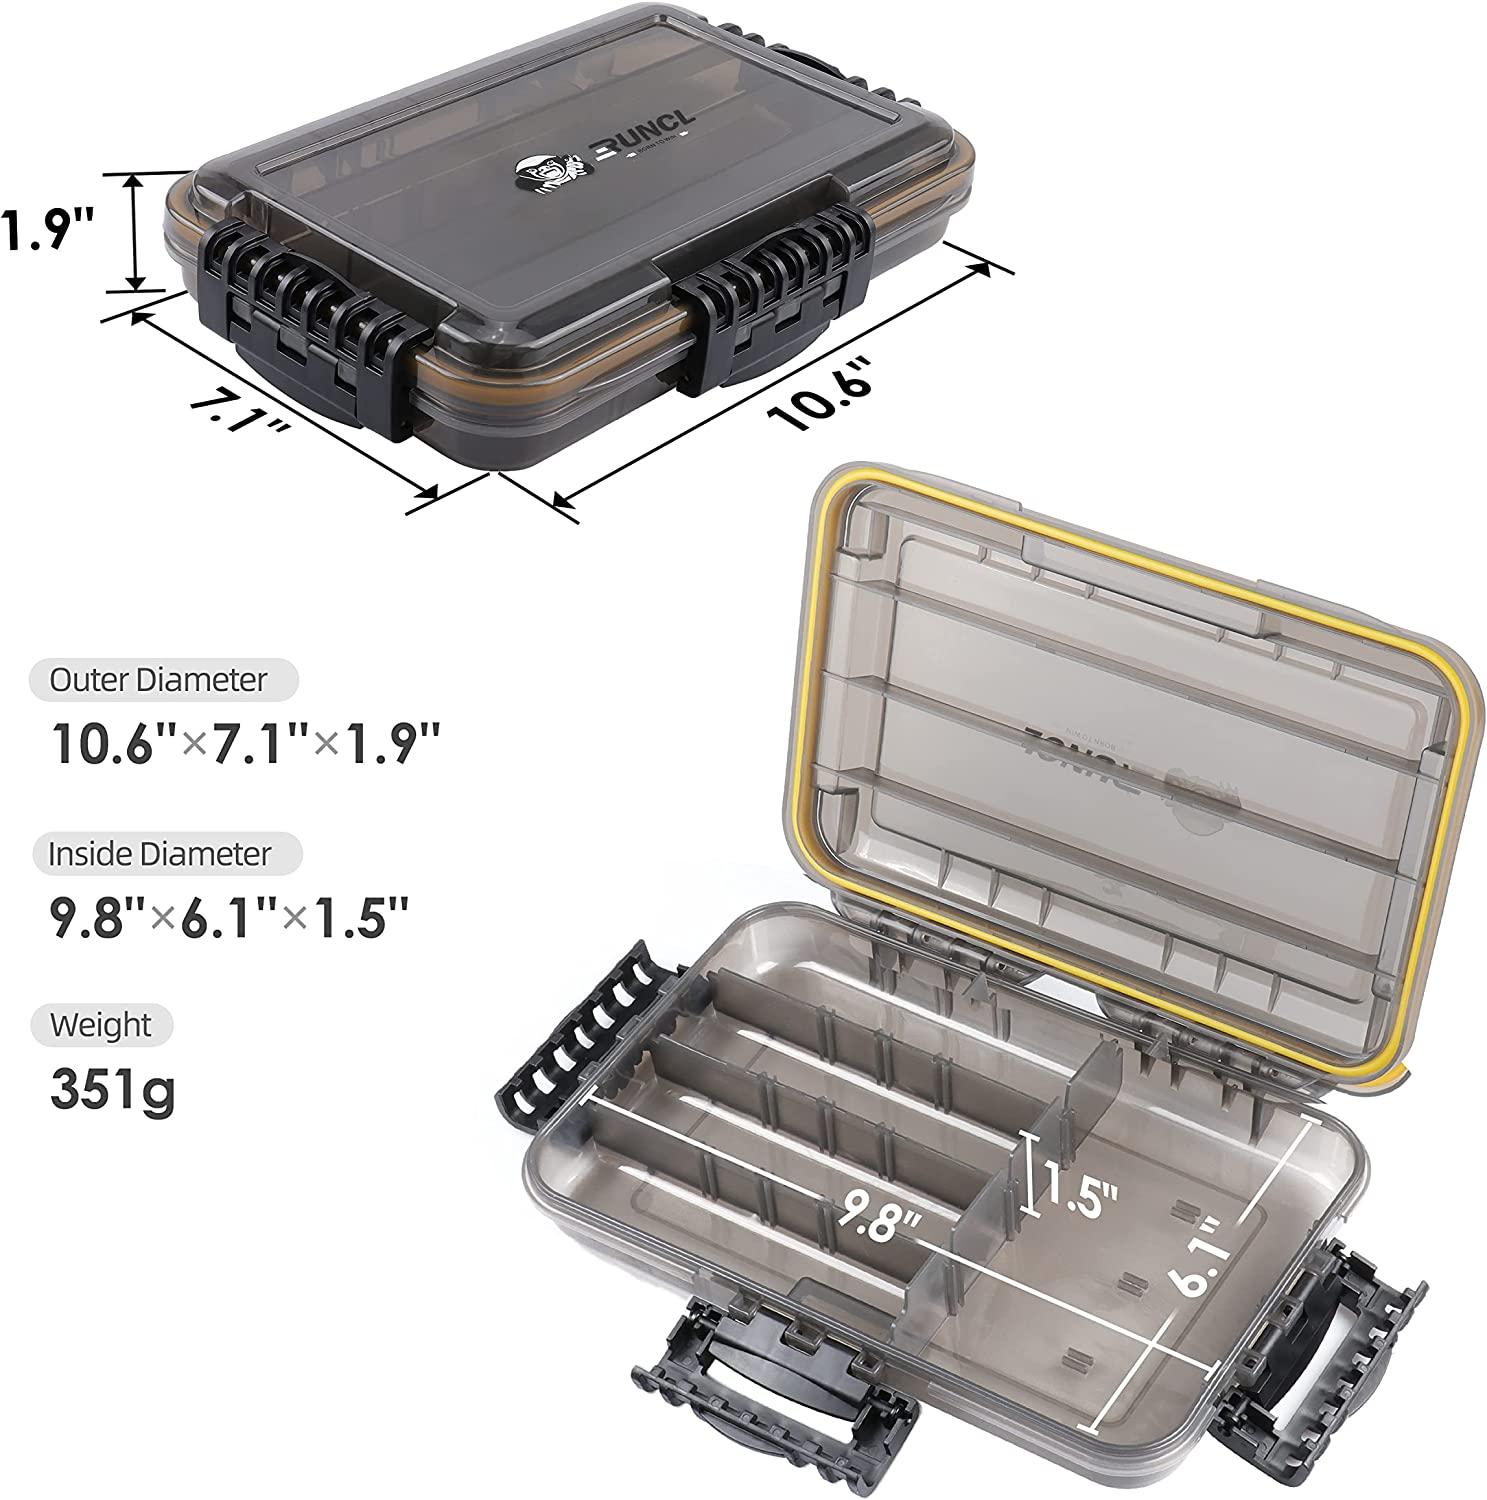  RUNCL Waterproof Fishing Tackle Box, Fishing Tackle Organizer  with Movable Tray, Soft Bait Organizer, Fishing Hook Organization, Tackle  Trays - Parts Box(Style B) : Sports & Outdoors